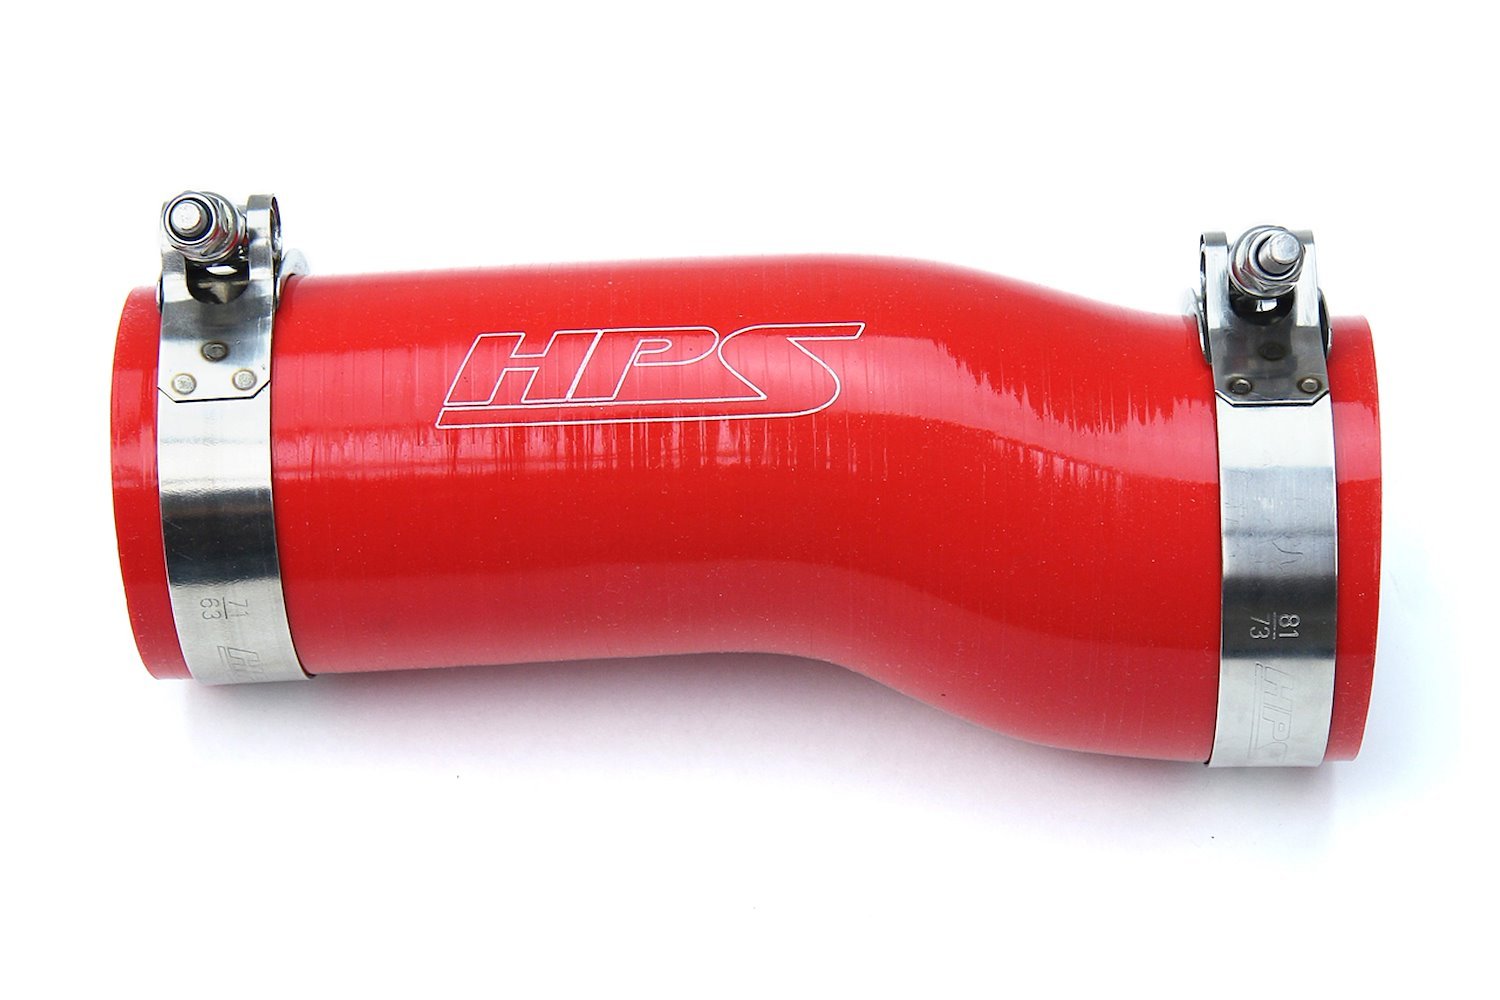 57-1595-RED Silicone Air Intake, Replace Stock Restrictive Air Intake, Improve Throttle Response, No Heat Soak